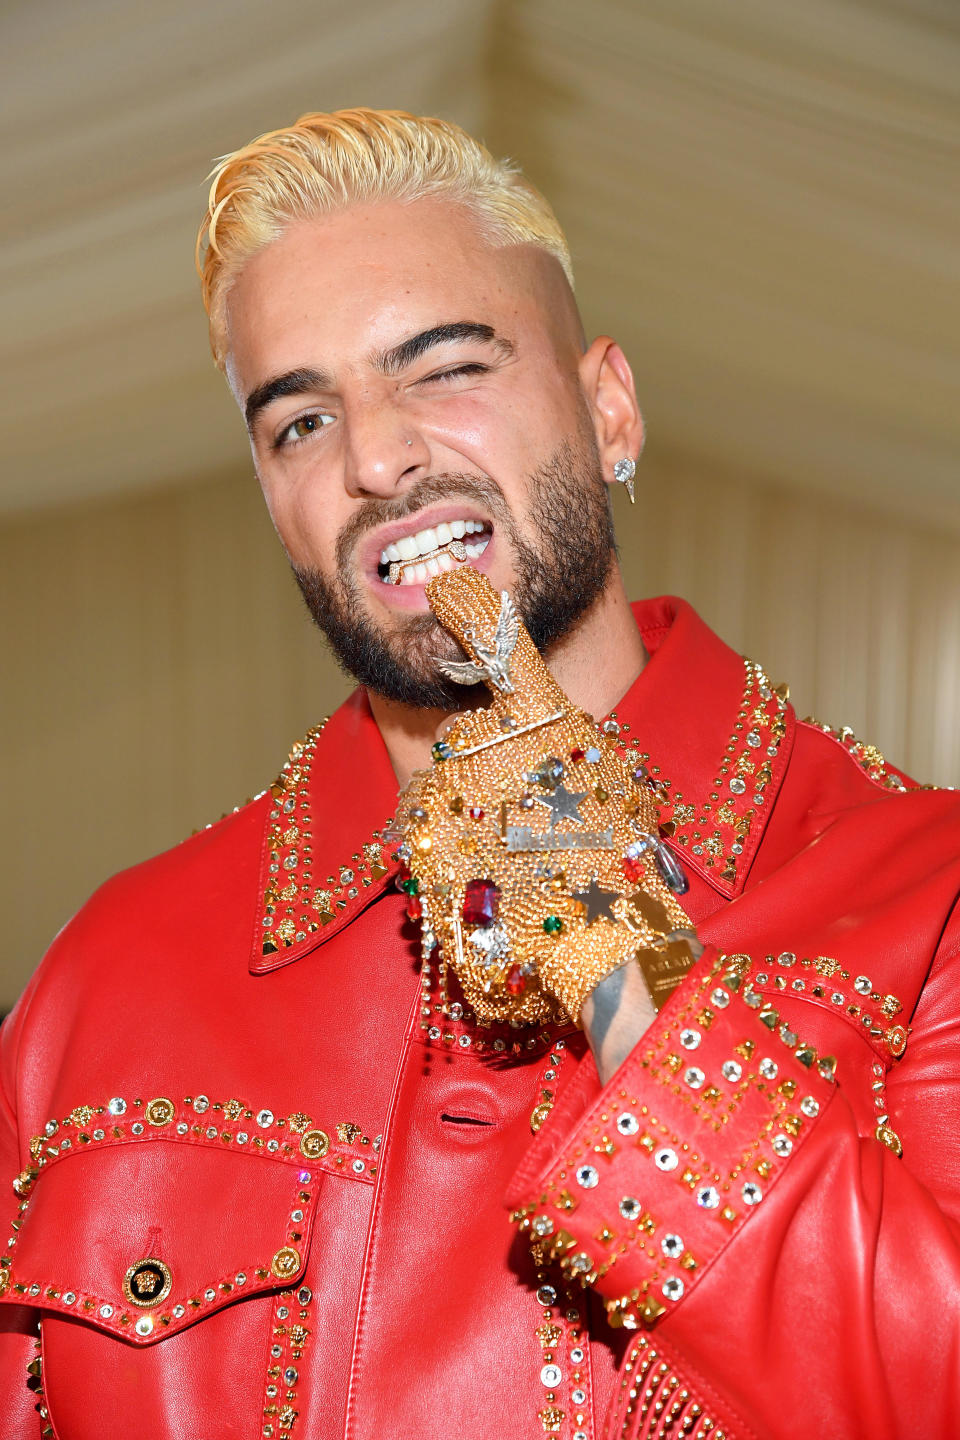 Maluma attends The 2021 Met Gala Celebrating In America: A Lexicon Of Fashion at Metropolitan Museum of Art on September 13, 2021 in New York City.  / Credit: Kevin Mazur/MG21/Getty Images For The Met Museum/Vogue